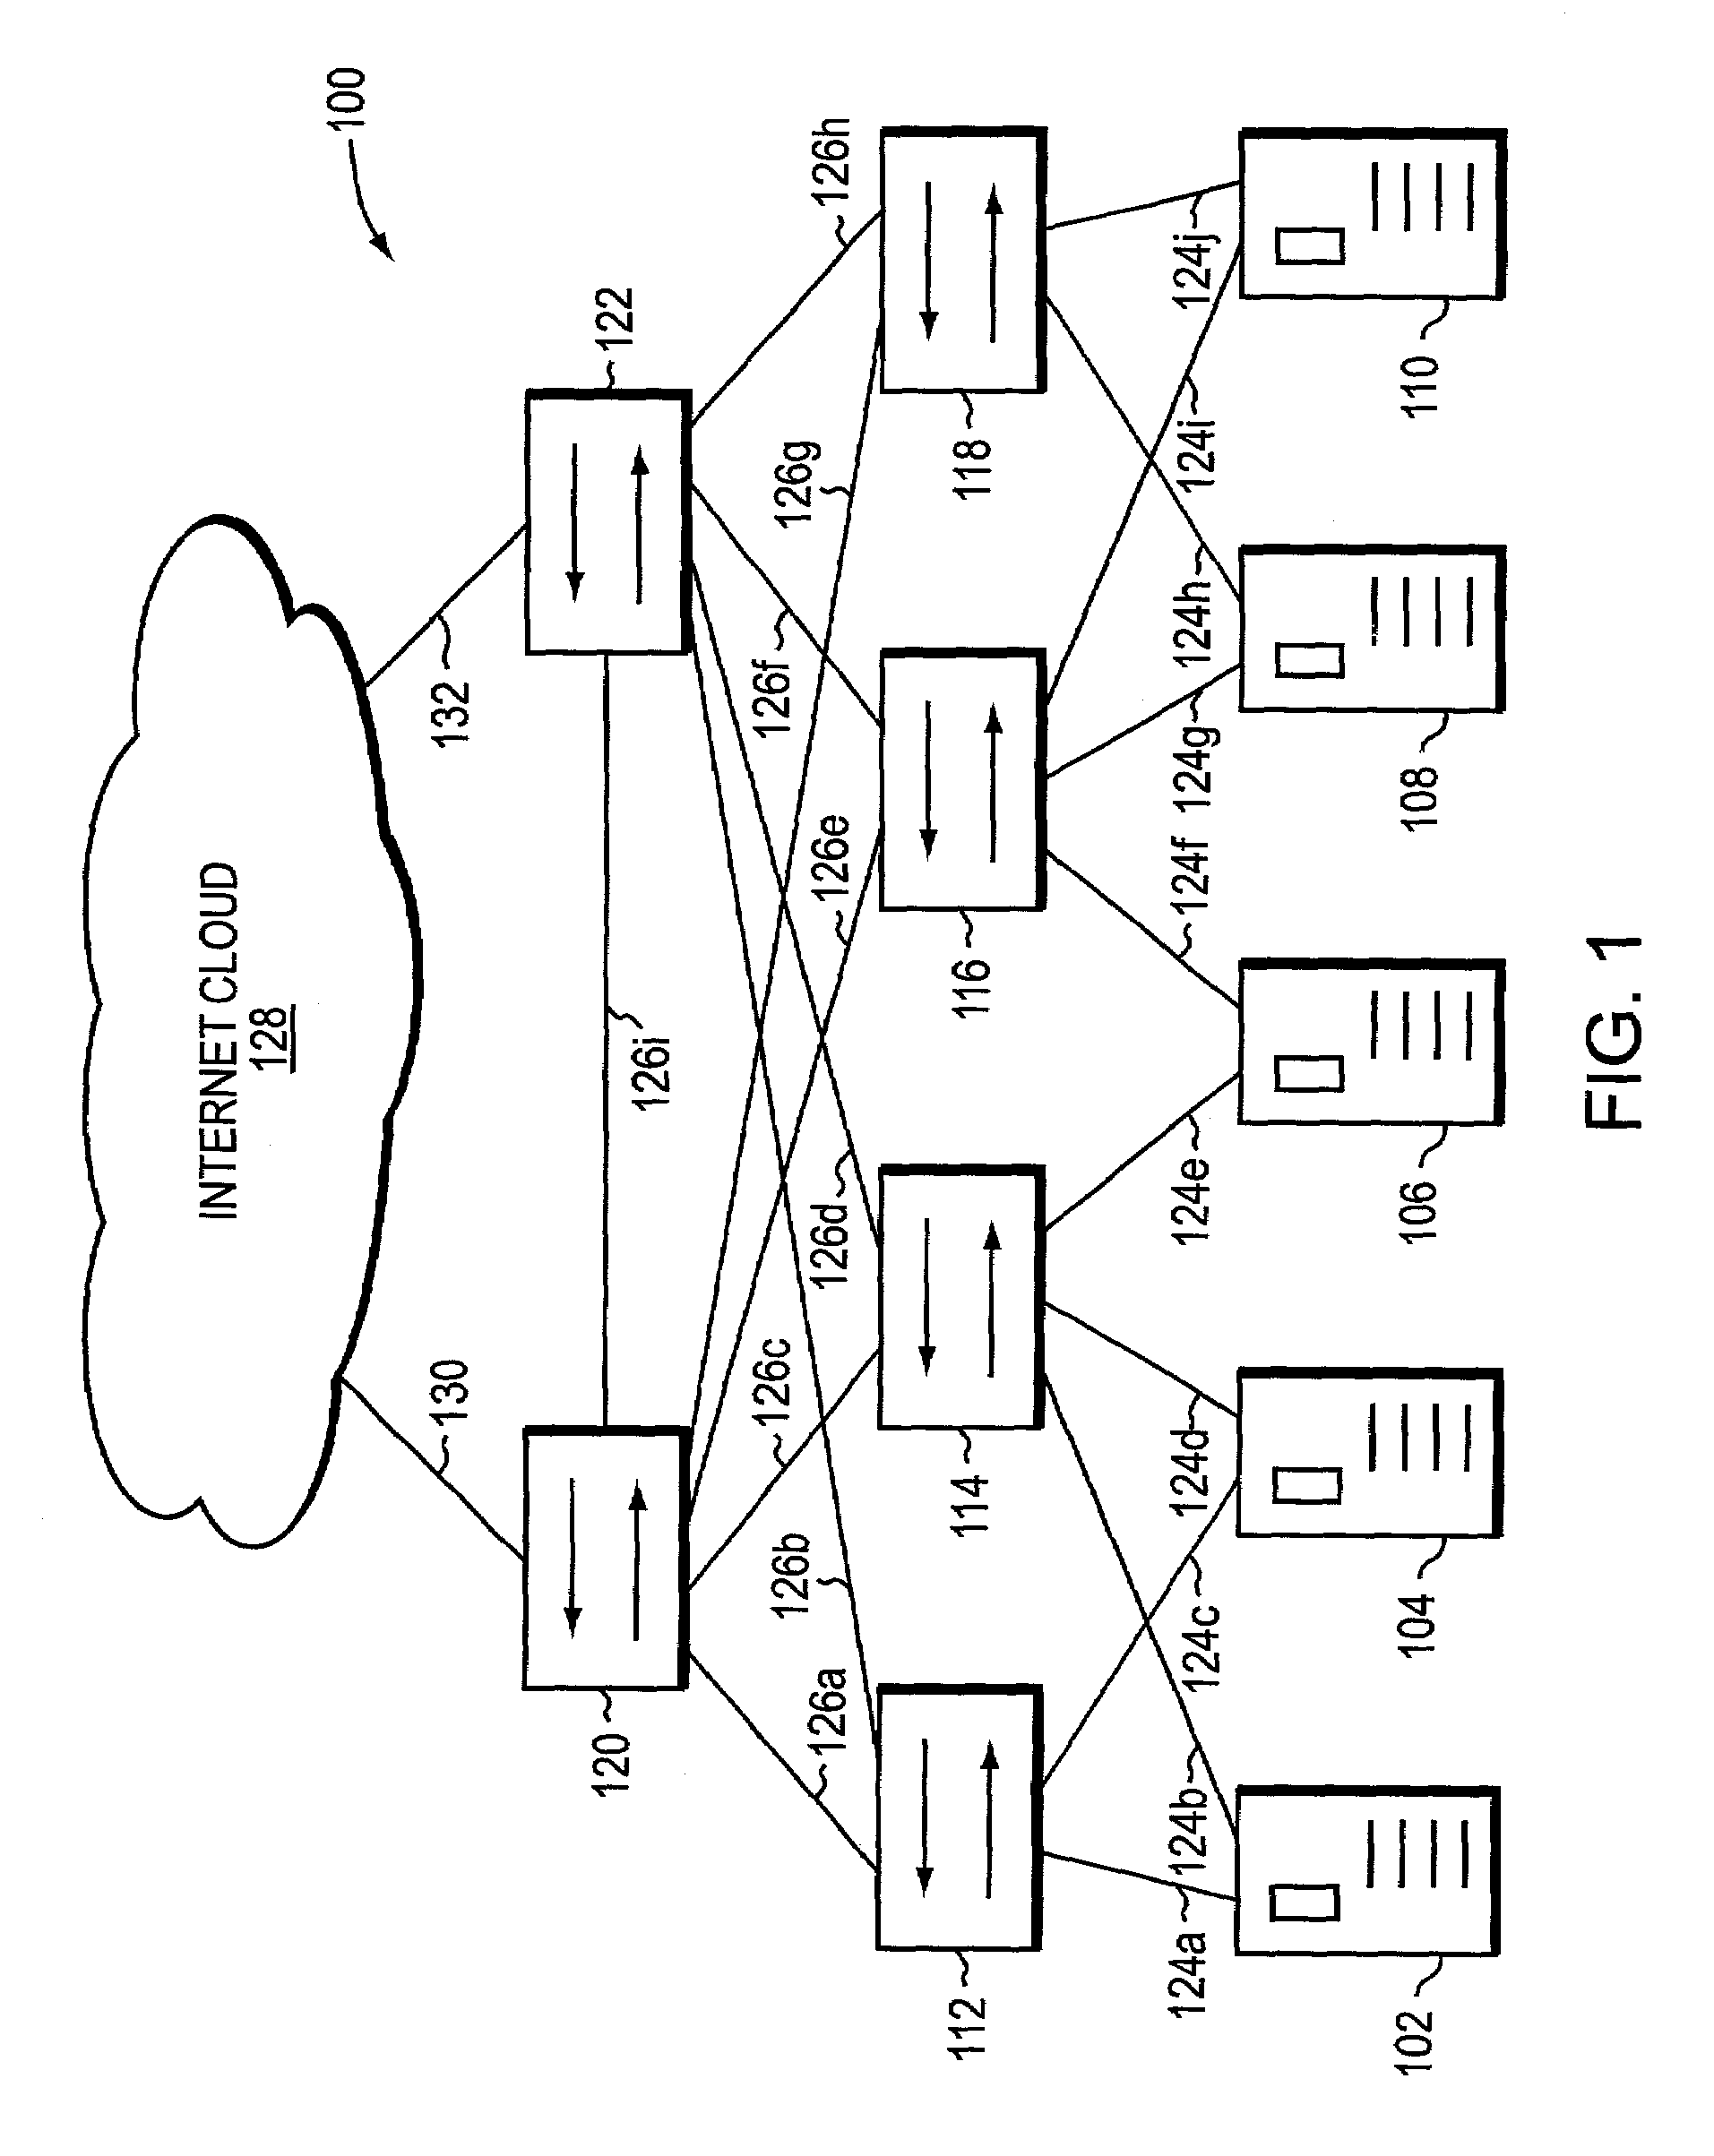 System and method using hierarchical parallel banks of associative memories